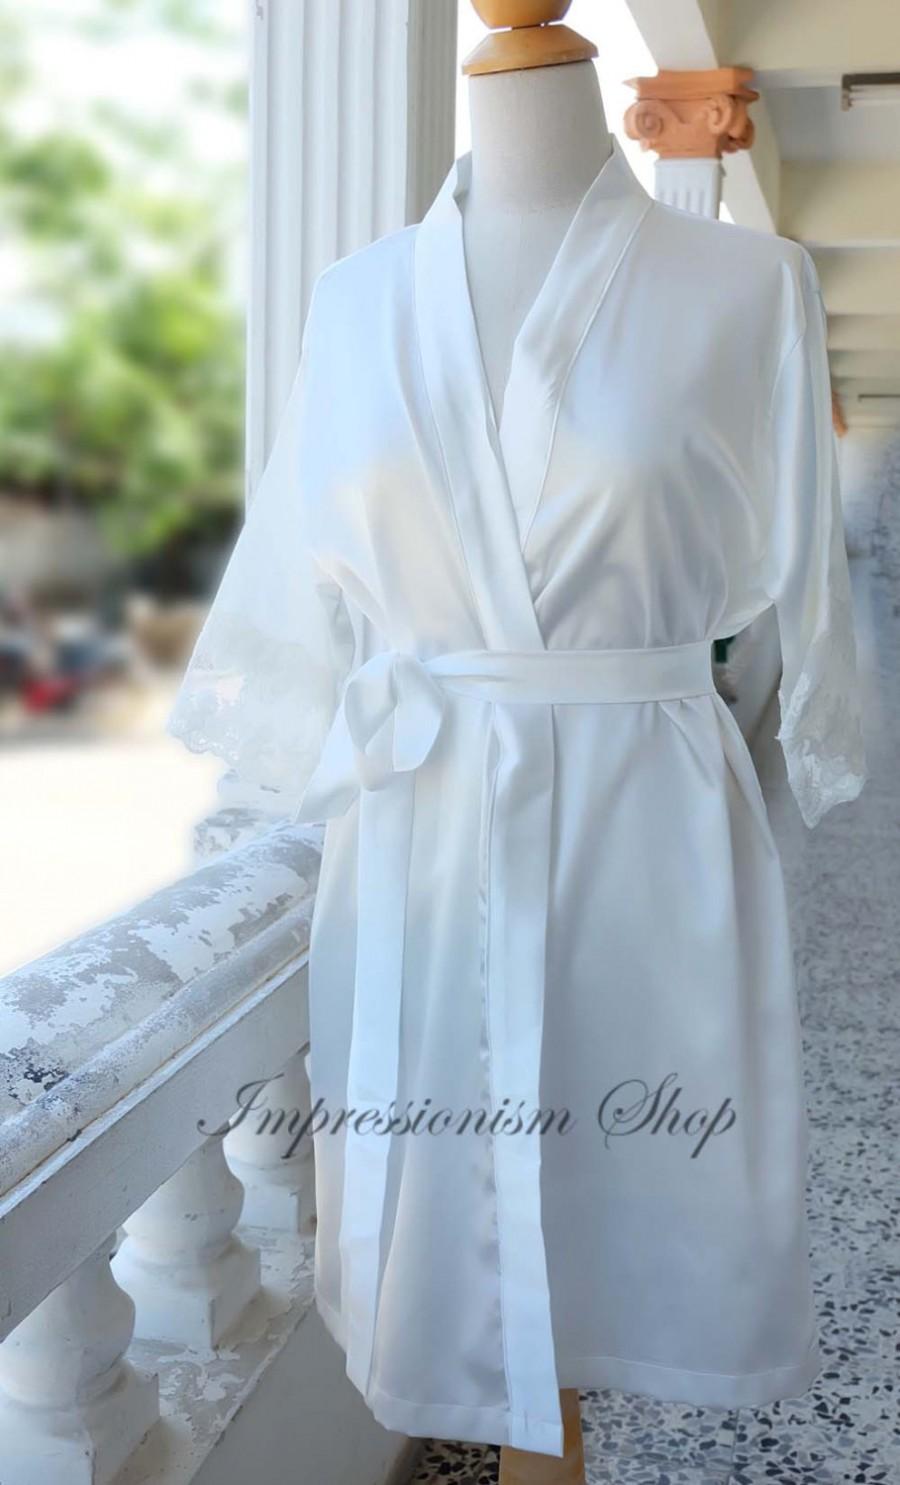 Hochzeit - White Ivory Satin Lace Robe for Bride, Lingerie, Getting Ready, Bridal Gift, Bachelorette party Gift, Honeymoon, Lace Kimono, Wedding Gift